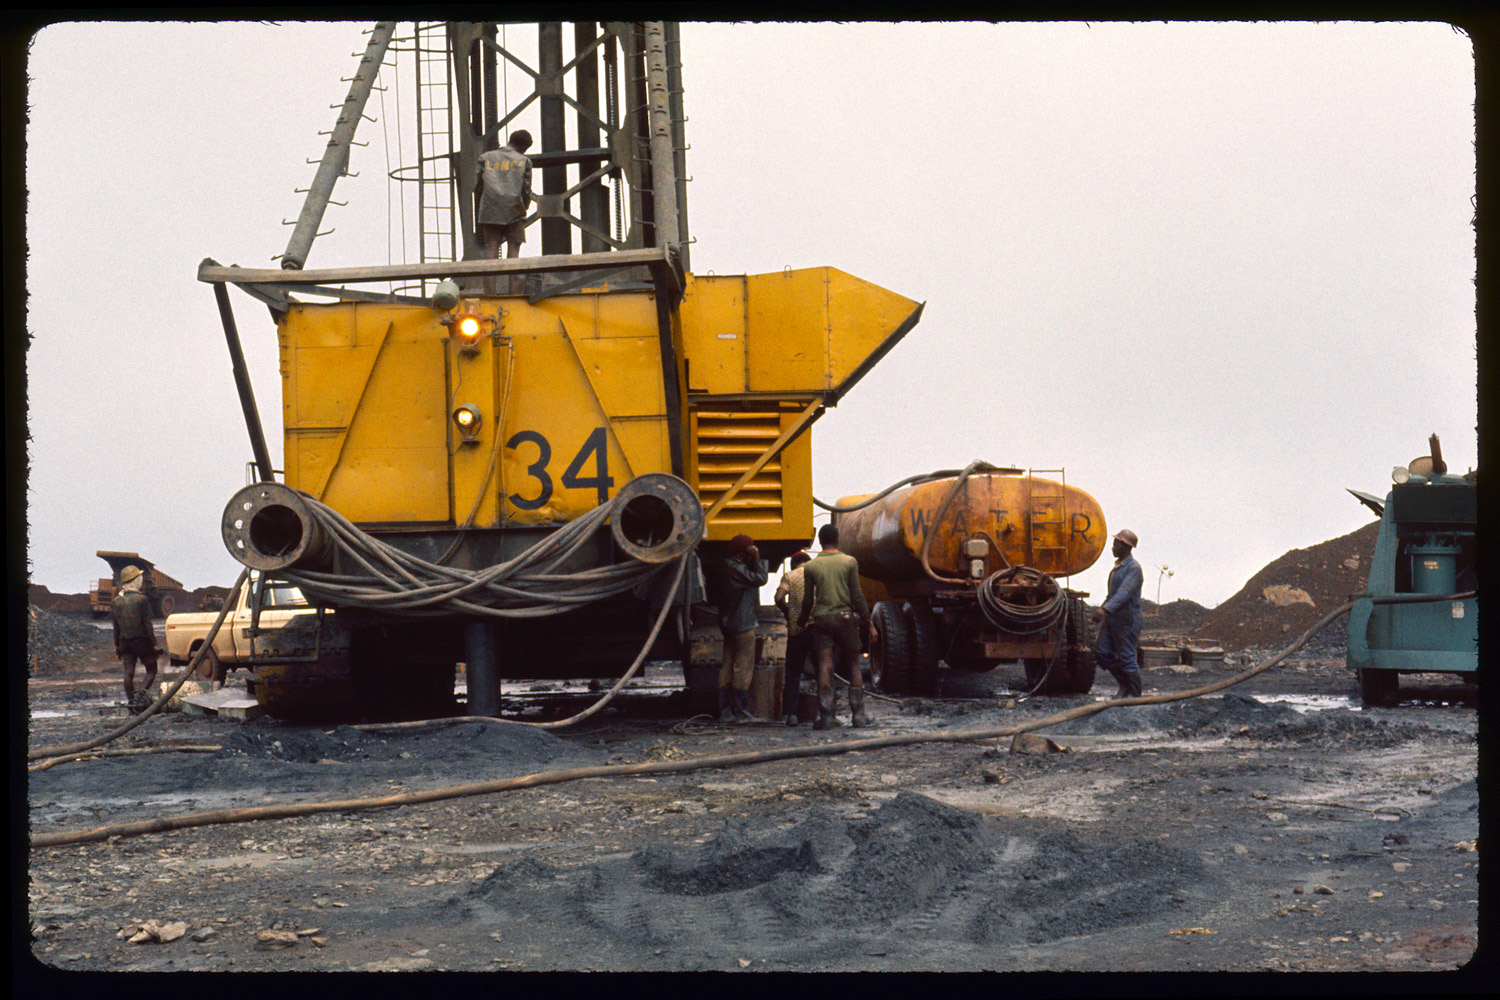 Exchem workers at Bong Mine, 1977.